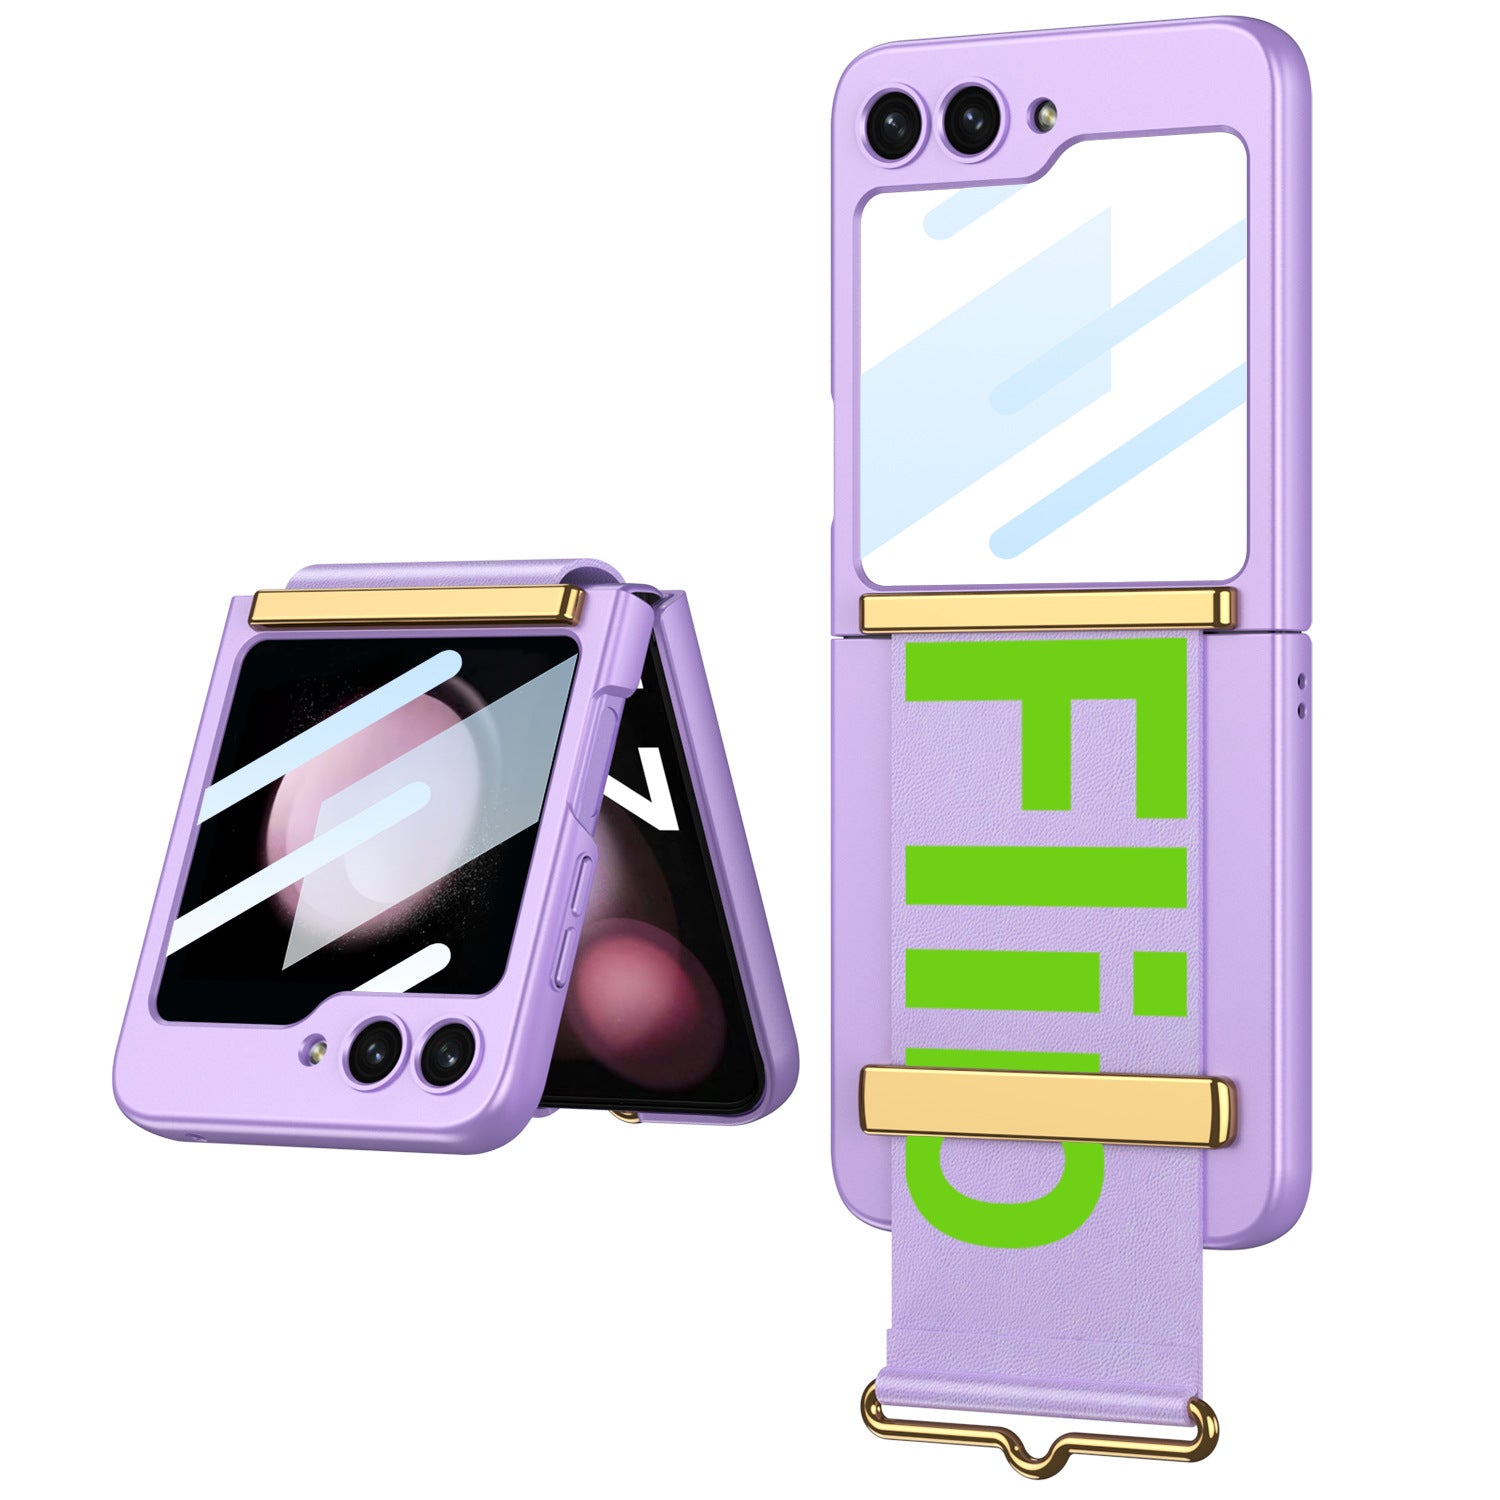 Wristband Ultra-thin Frosted Phone Case With Tempered Glass Protector For Samsung Galaxy Z Flip5 Flip4 Flip3 - mycasety2023 Mycasety